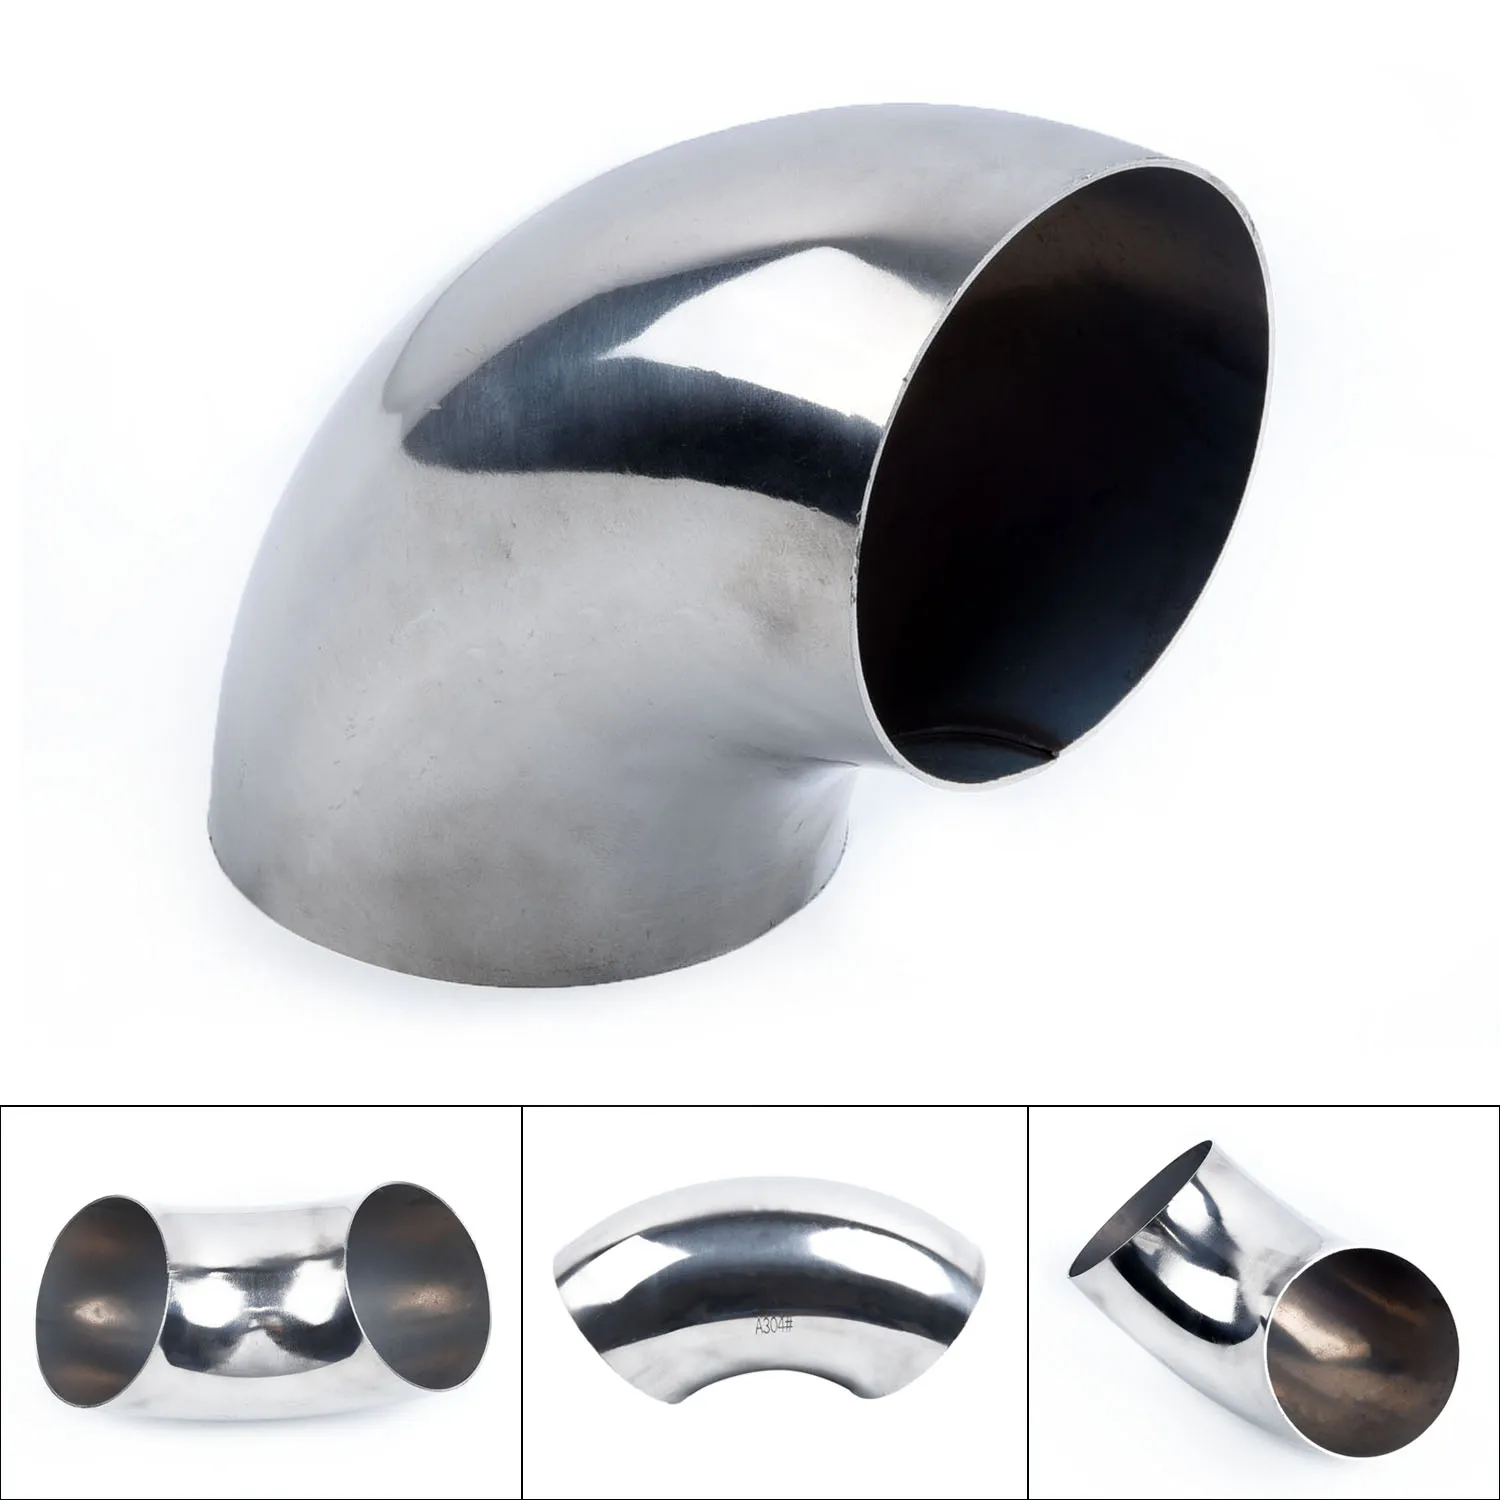 Stainless Steel Diameter 3 inch /76mm Elbow 90° Thickness 1mm Material 201 Car Modified Exhaust Pipe